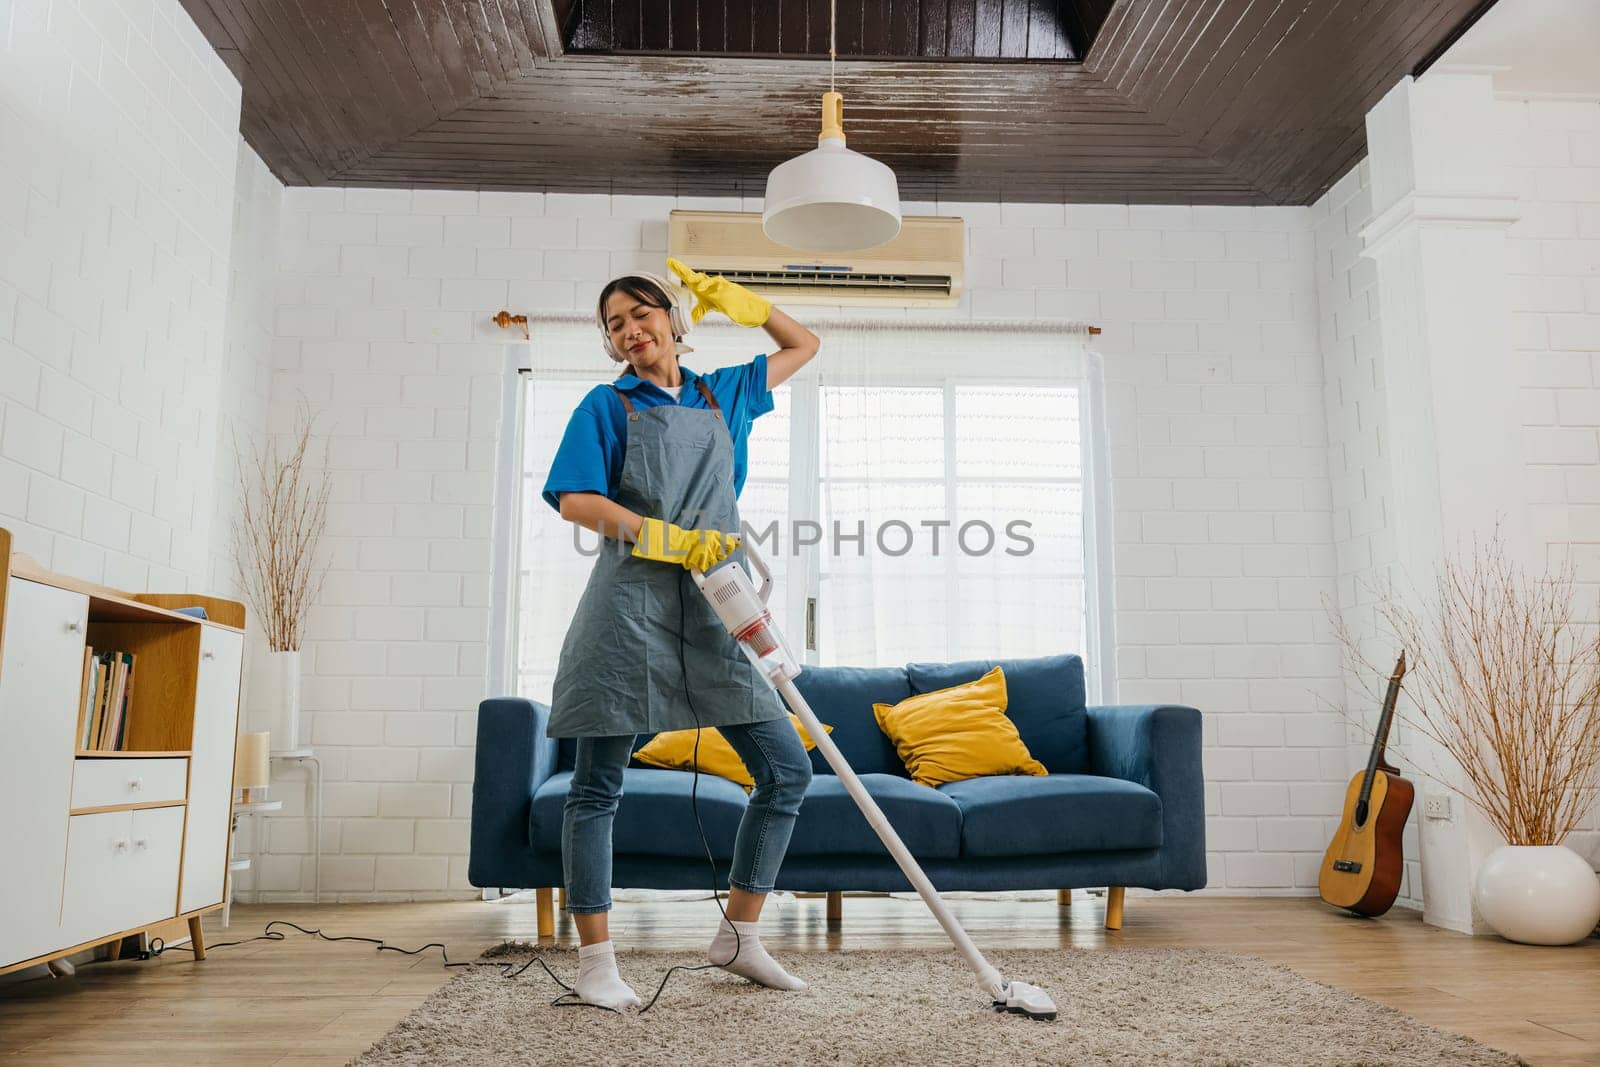 Happy maid's cleanup melody, Asian woman uses mop as mic singing dancing. Fun-filled service with music laughter and excitement. Modern domestic joy. Give me a beat, maid dancing having fun by Sorapop